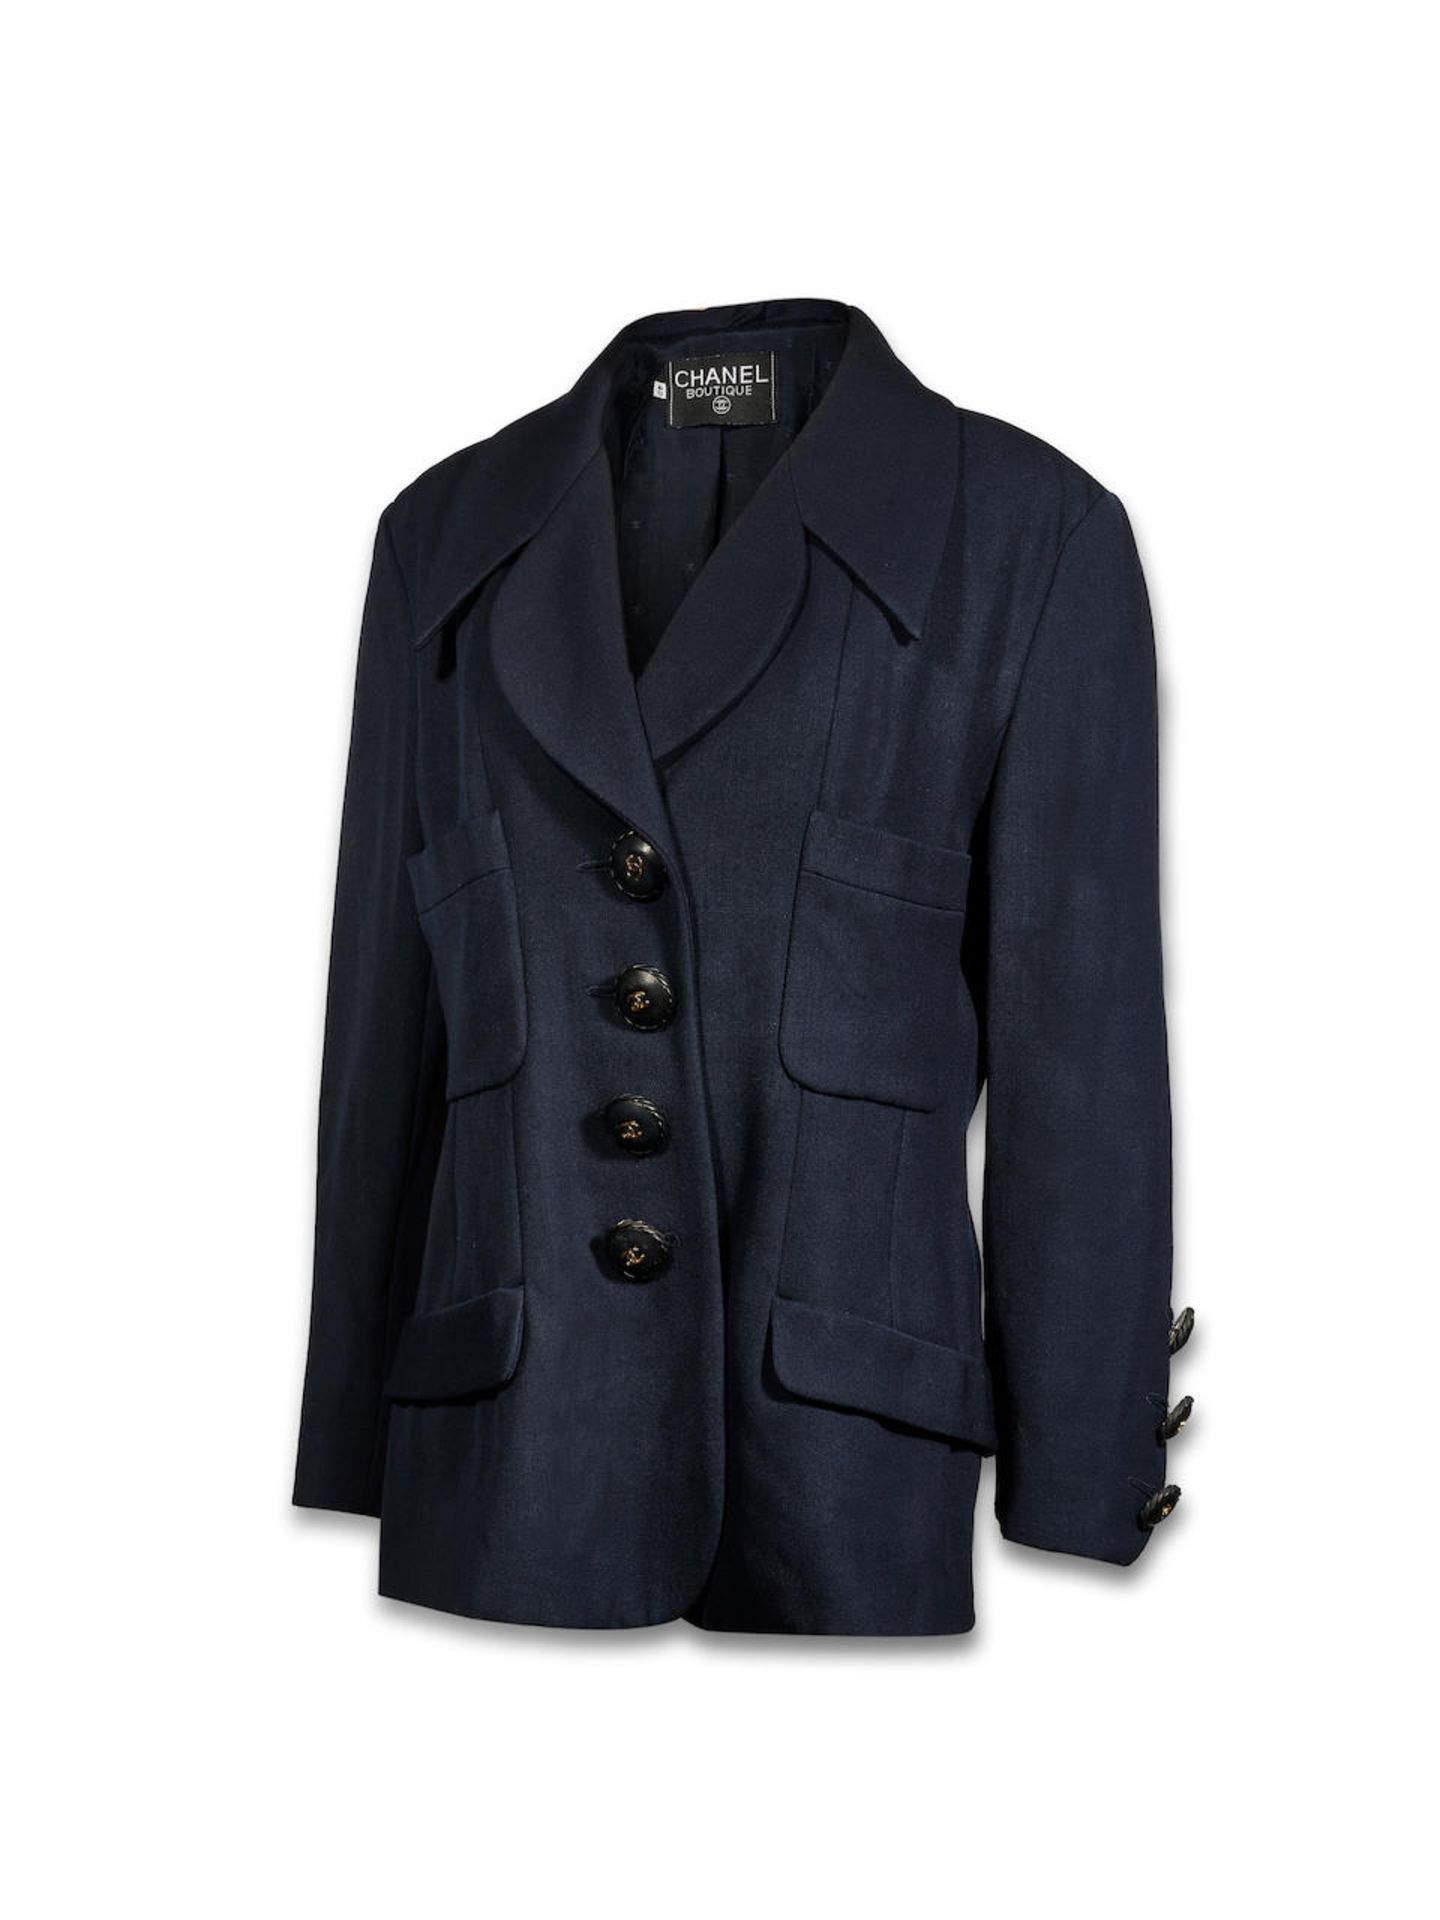 CHANEL: NAVY JACKET WITH CC BUTTONS (Includes clothes-hanger)